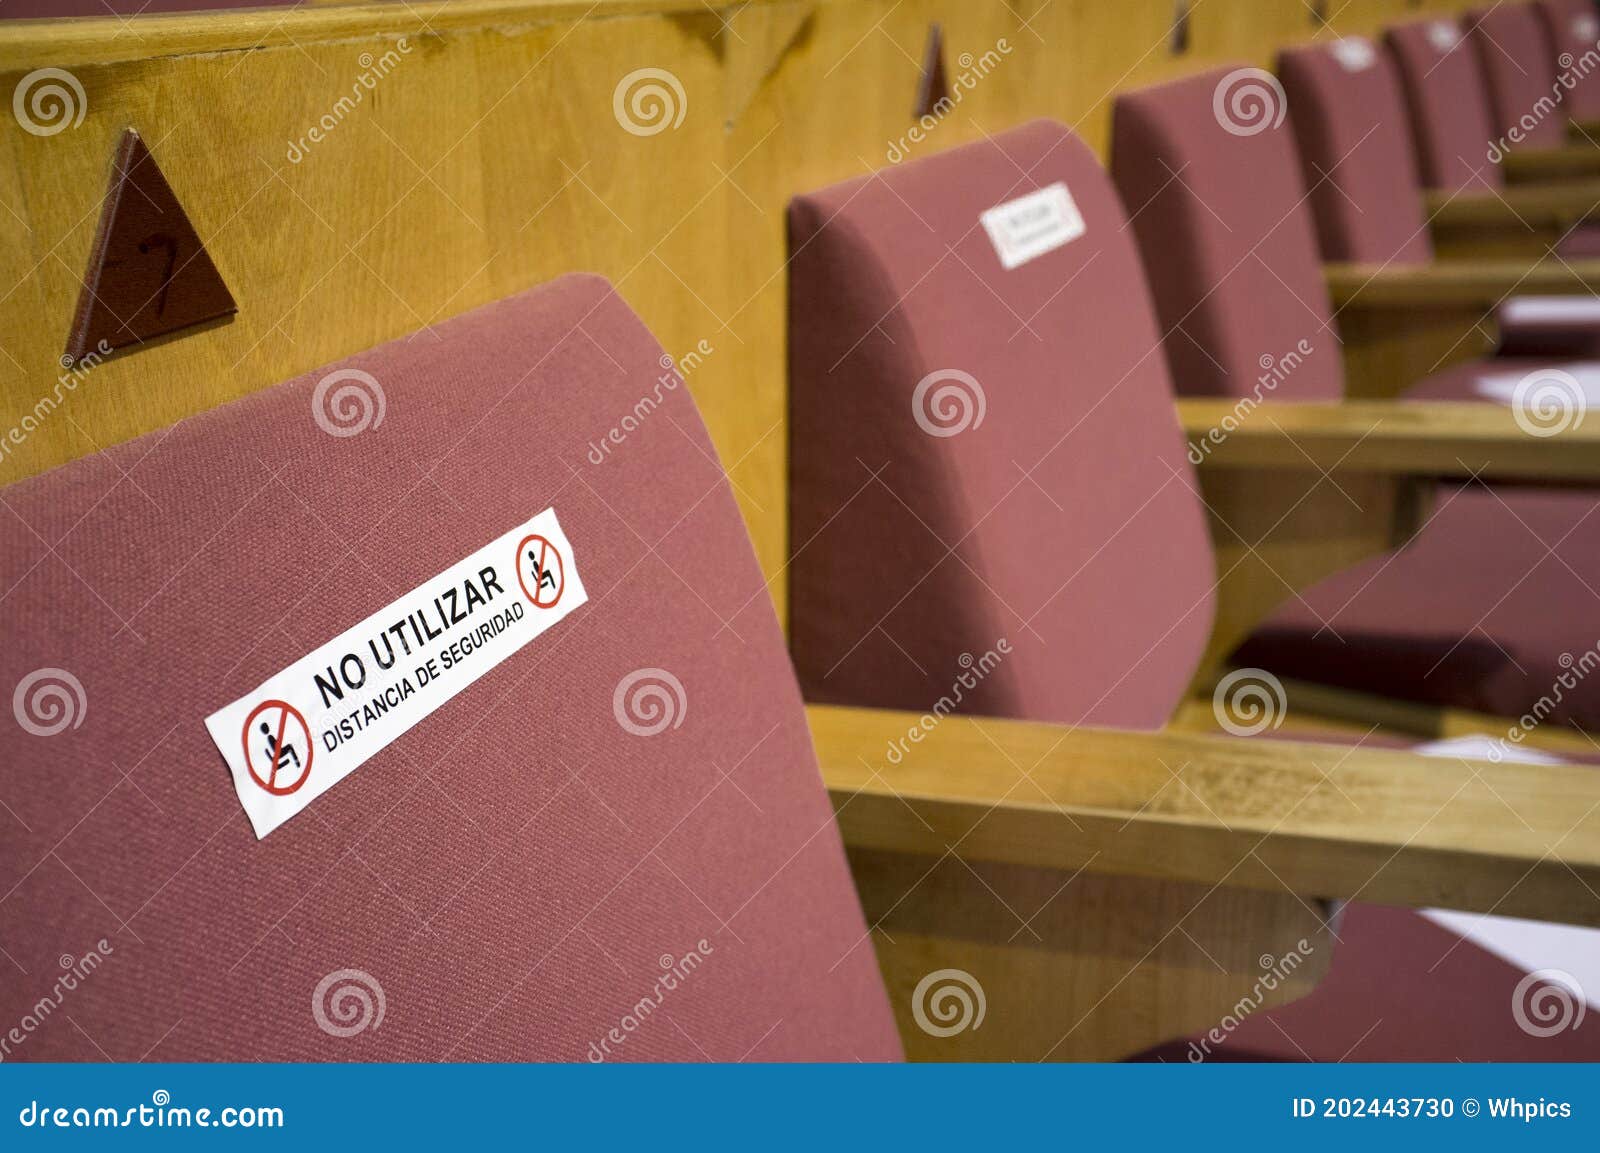 social distancing stickers at theatre grandstand